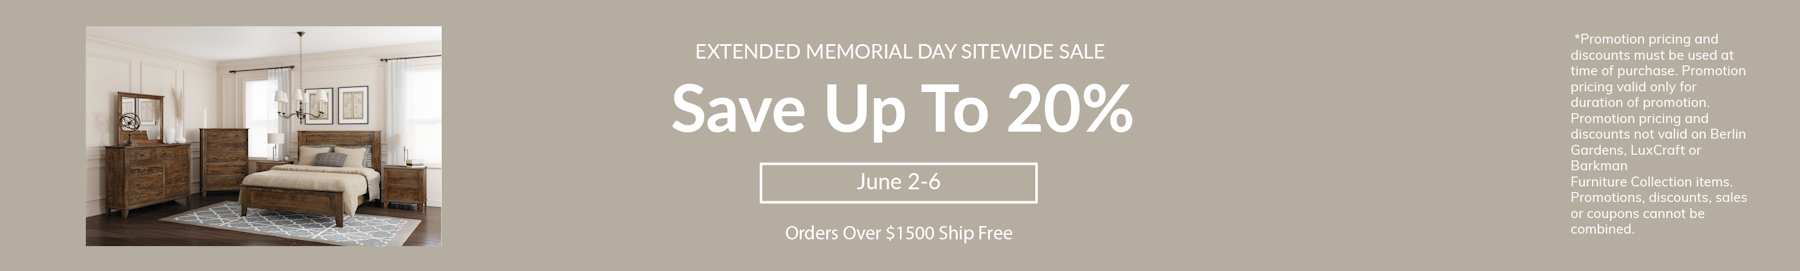 Memorial Day Sitewide Sale